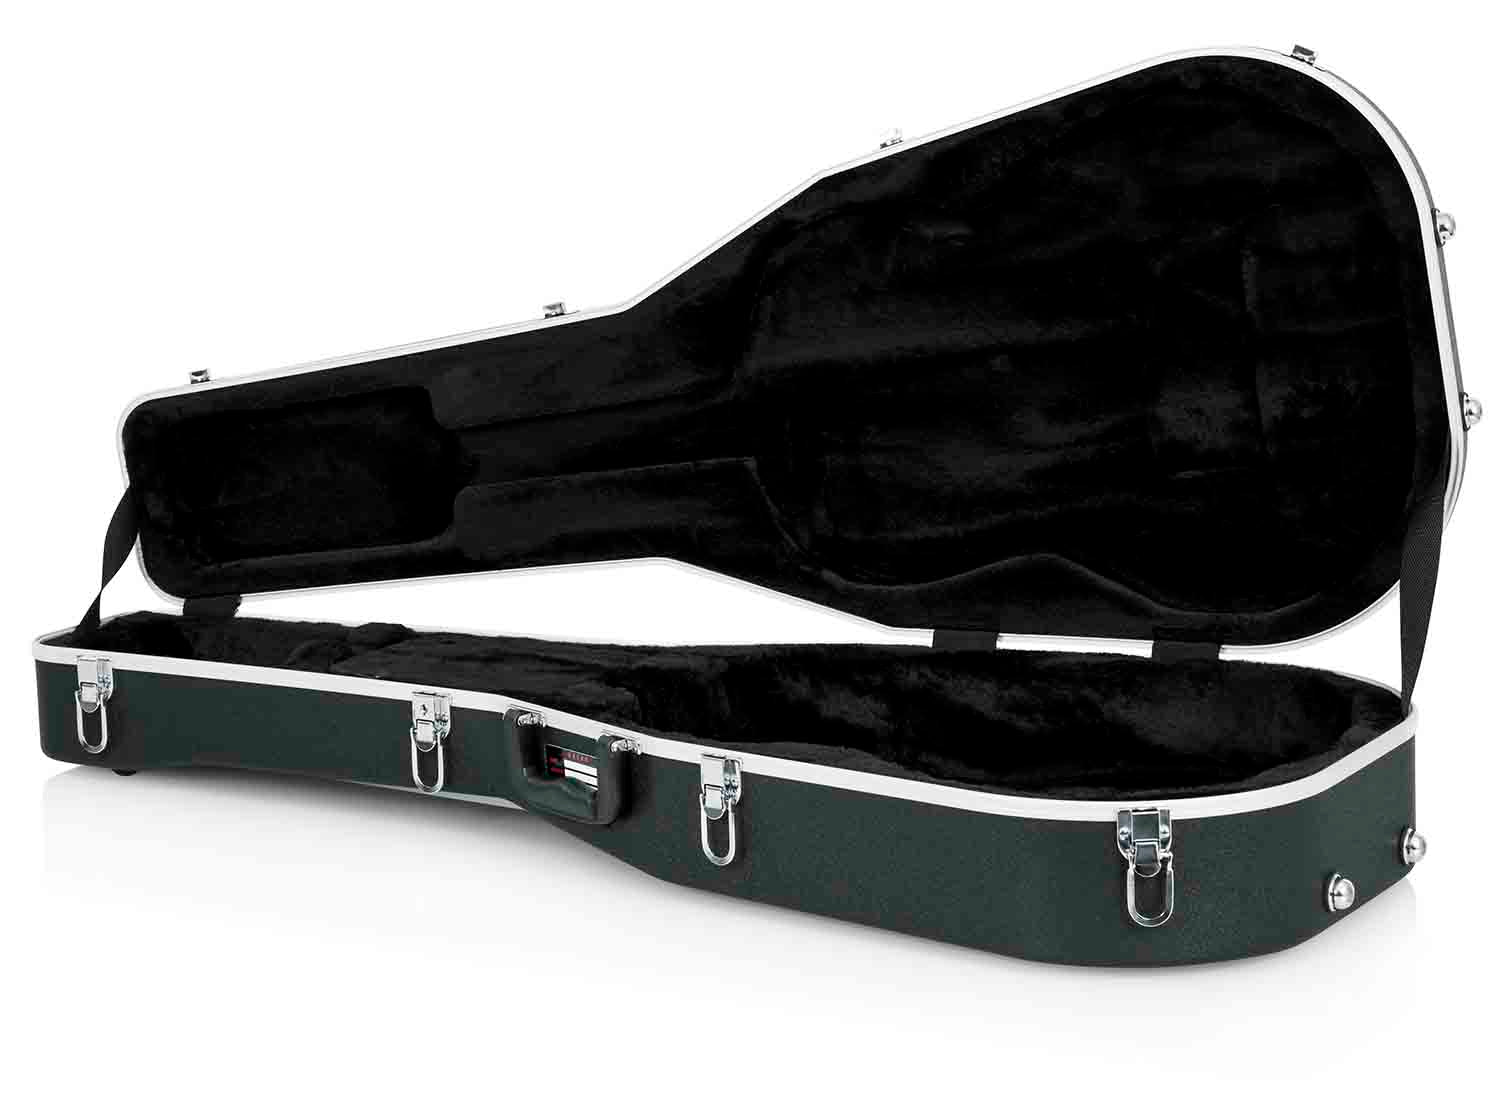 Gator Cases GC-CLASSIC Deluxe Molded Guitar Case for Classic Guitars - Hollywood DJ